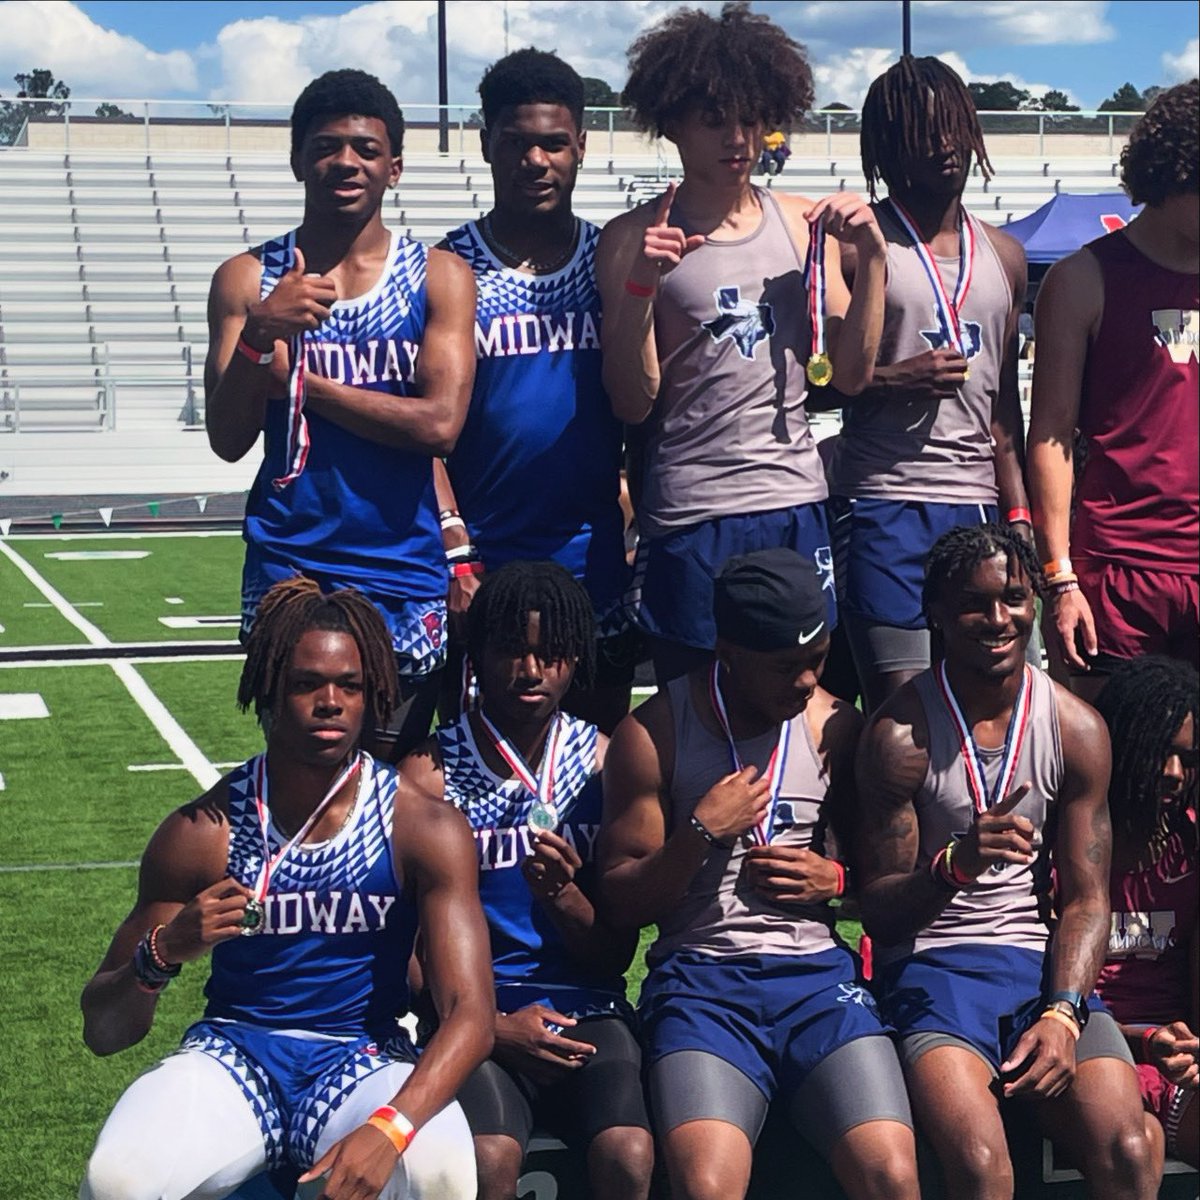 Congratulations to our Boys 4x100 relay team on their 2nd place finish at the Huntsville Track Meet @midwayhs